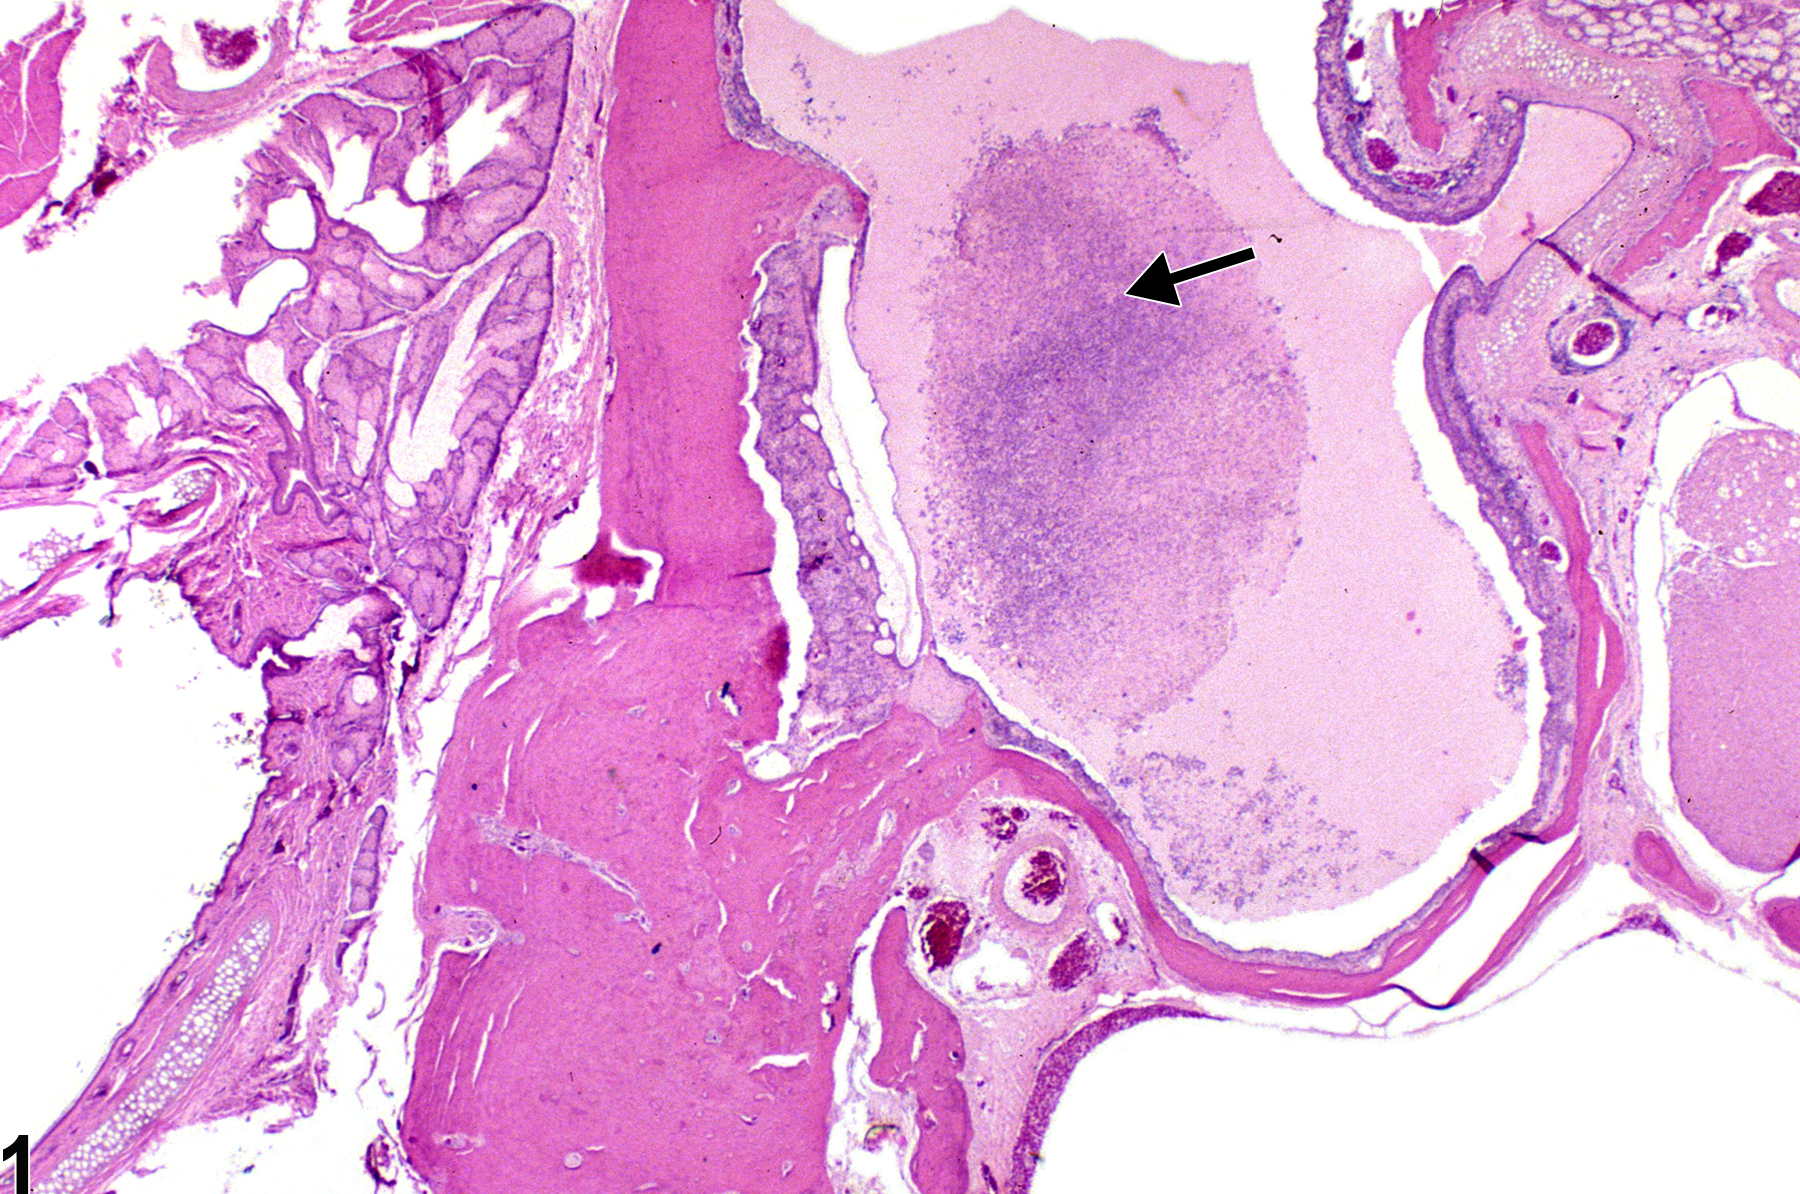 Image of inflammation in the ear from a male F344/N rat in a chronic study